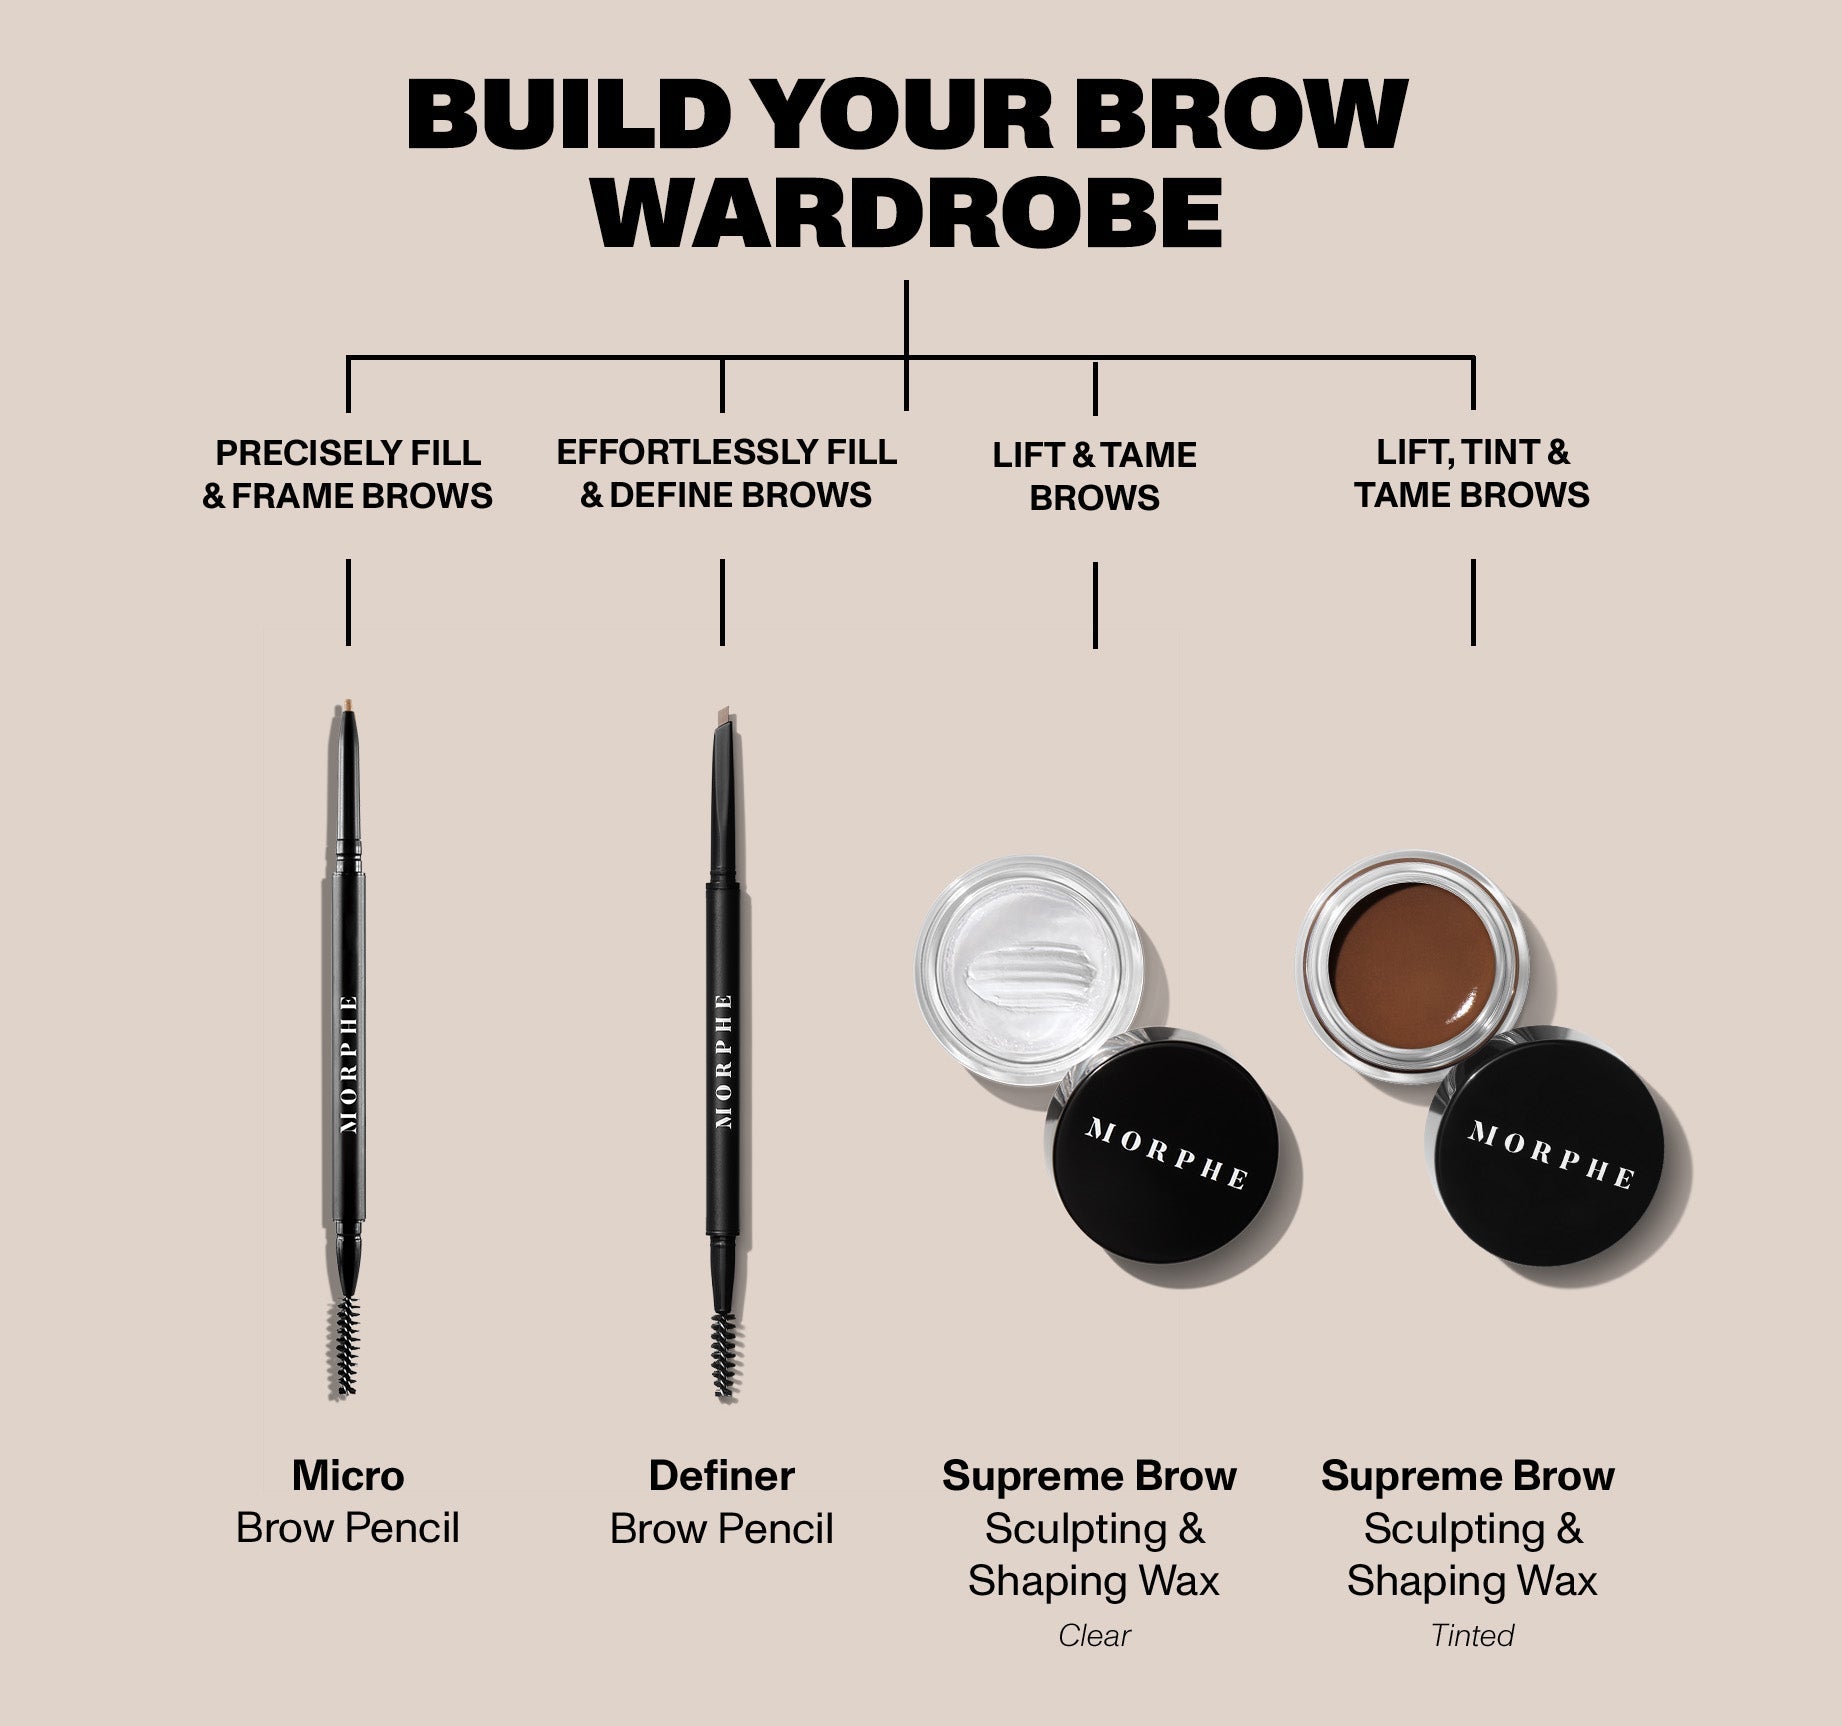 Supreme Brow Sculpting And Shaping Wax - Java - Image 9